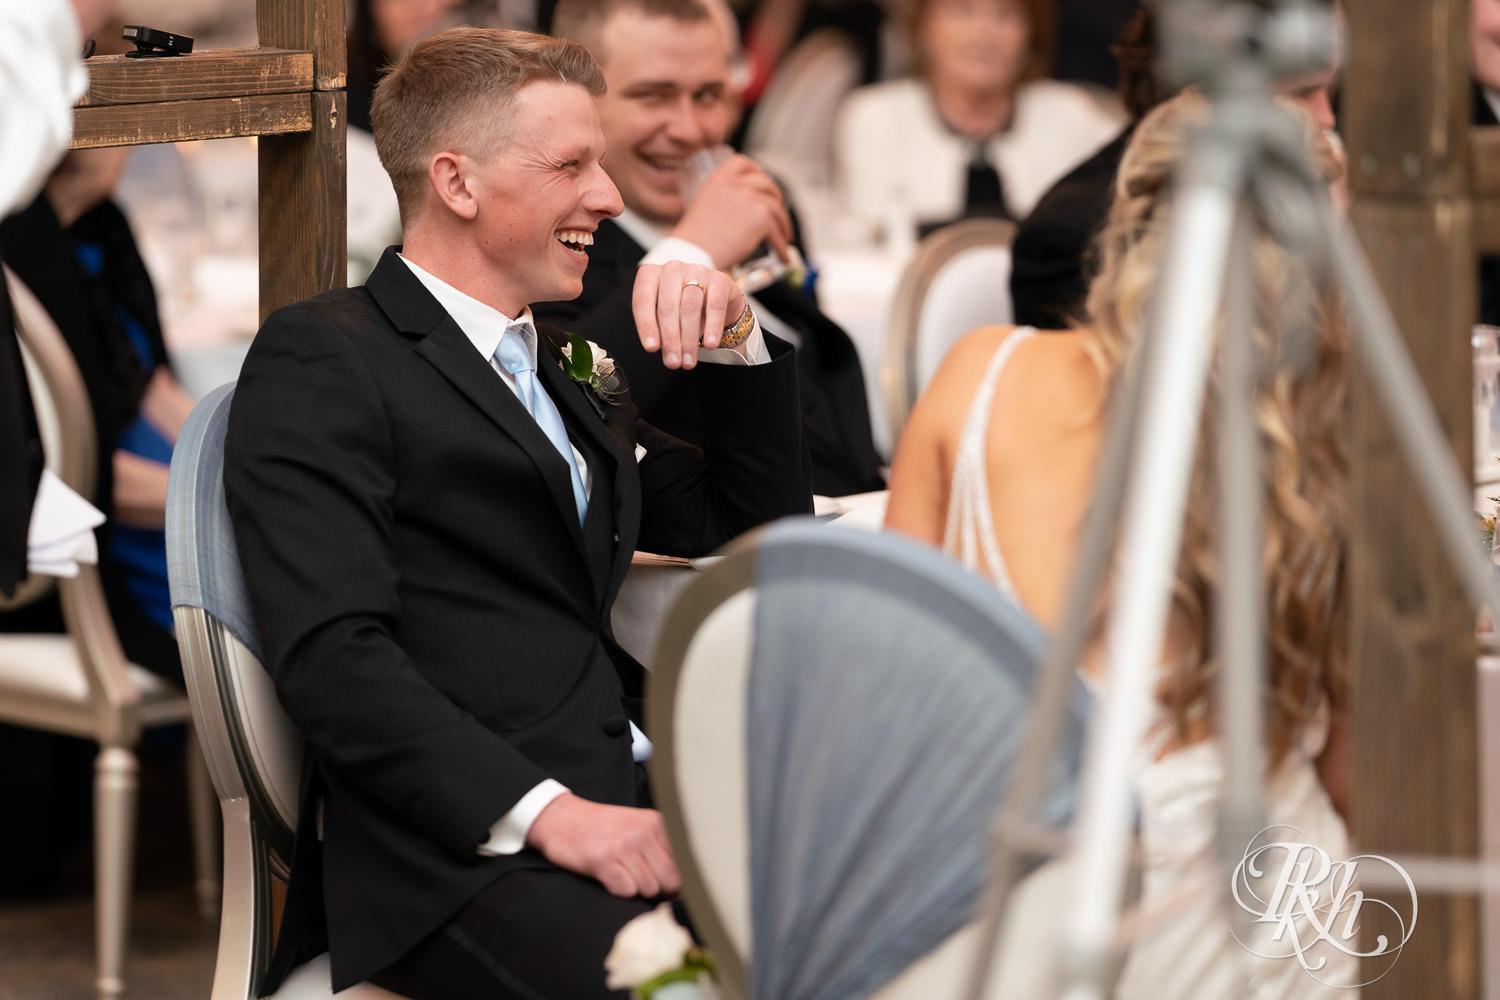 Groom smiles during speeches at wedding reception at Bavaria Downs in Chaska, Minnesota.